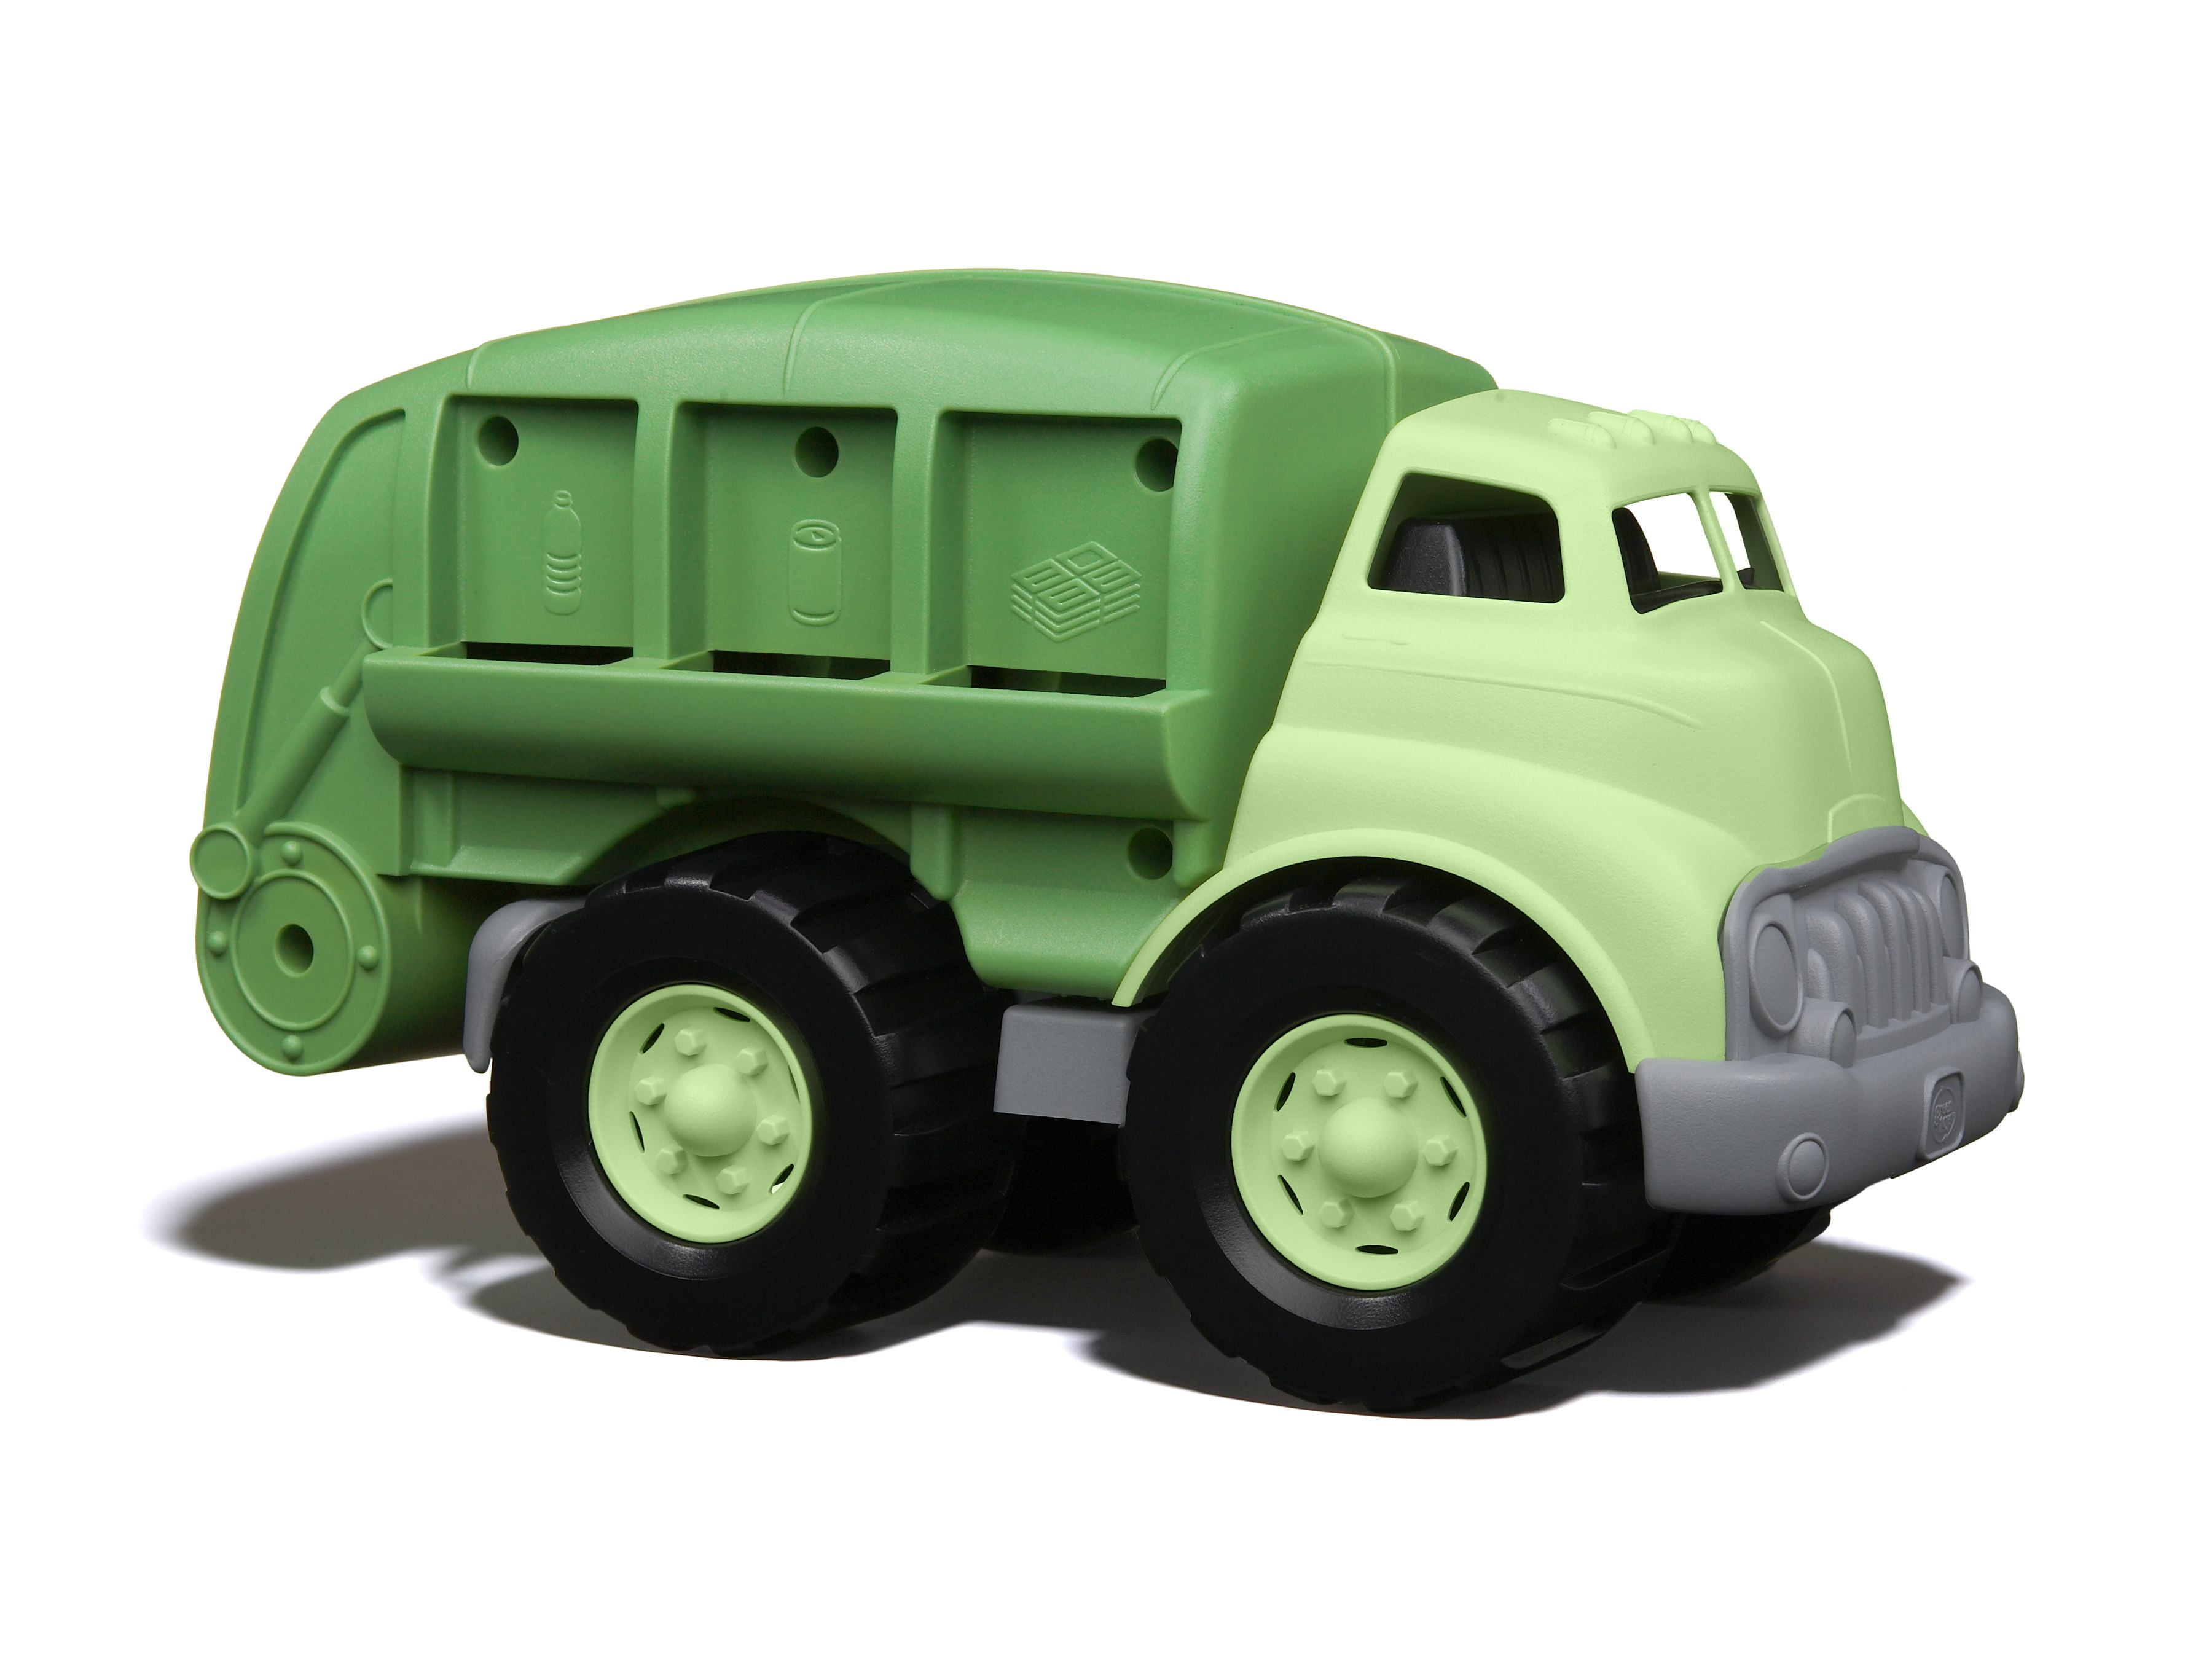 Green Toys Tractor Vehicle Orange 816409010423 for sale online 